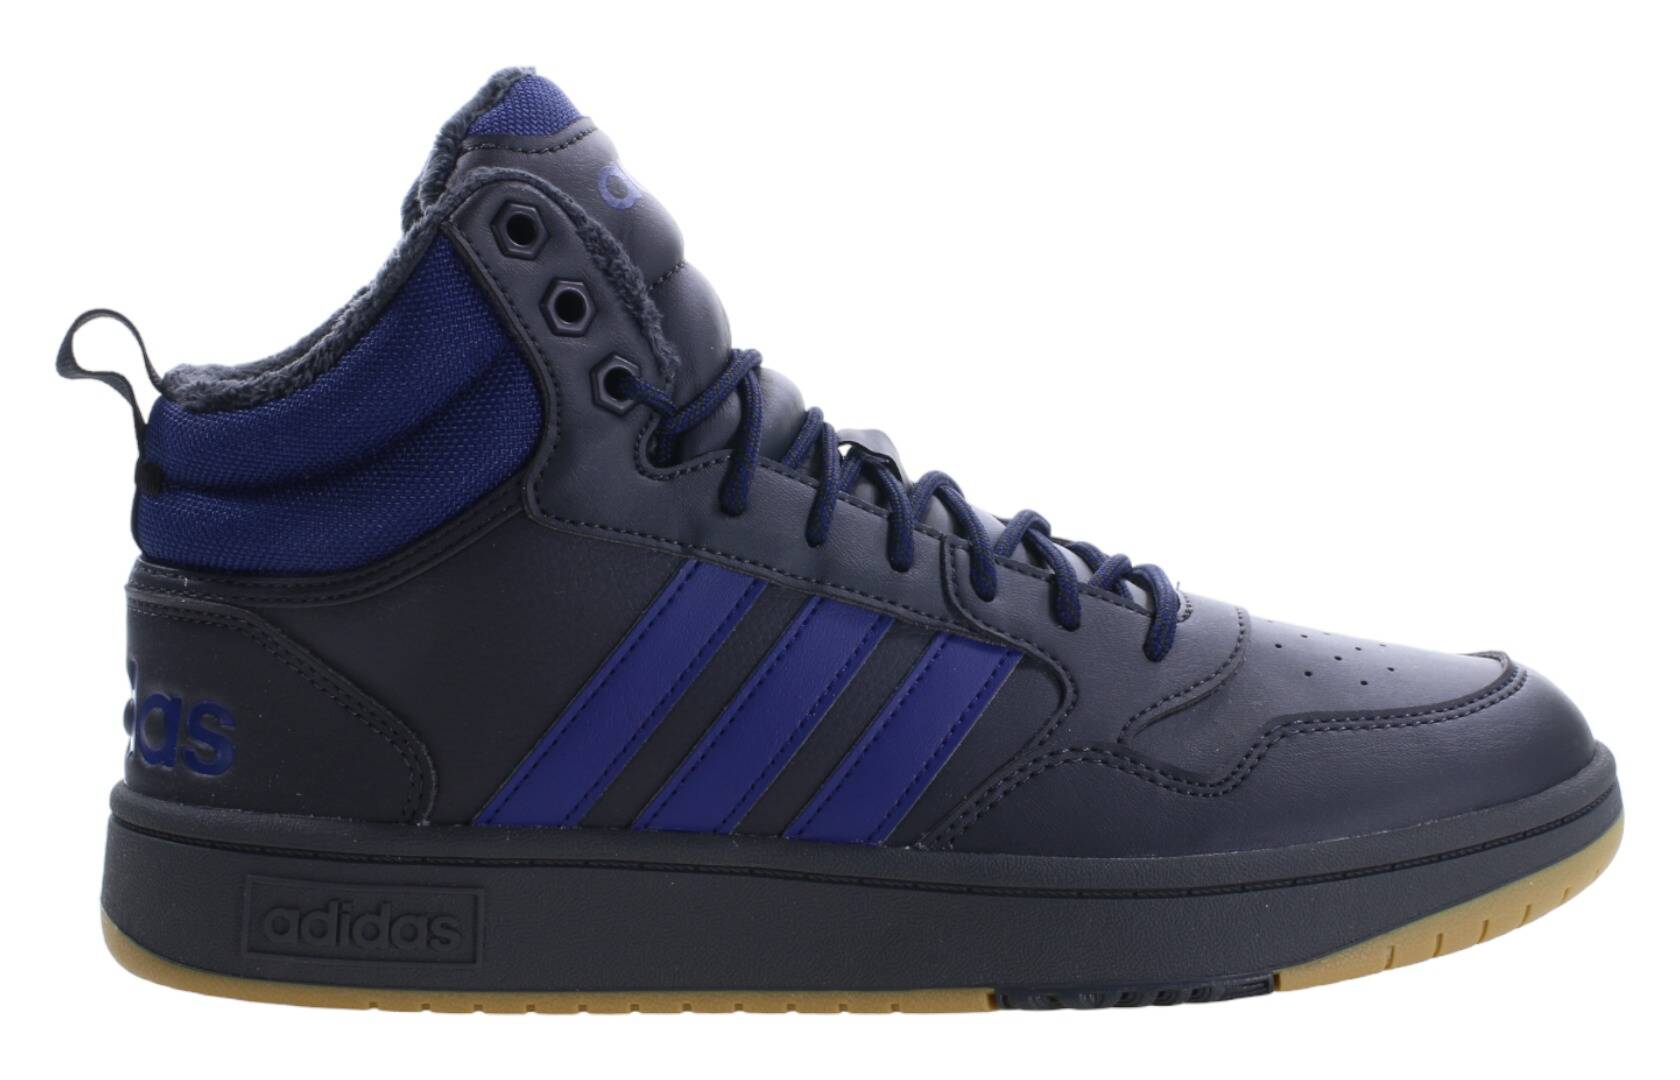 adidas HOOPS 3.0 MID WTR IF2635 men's shoes